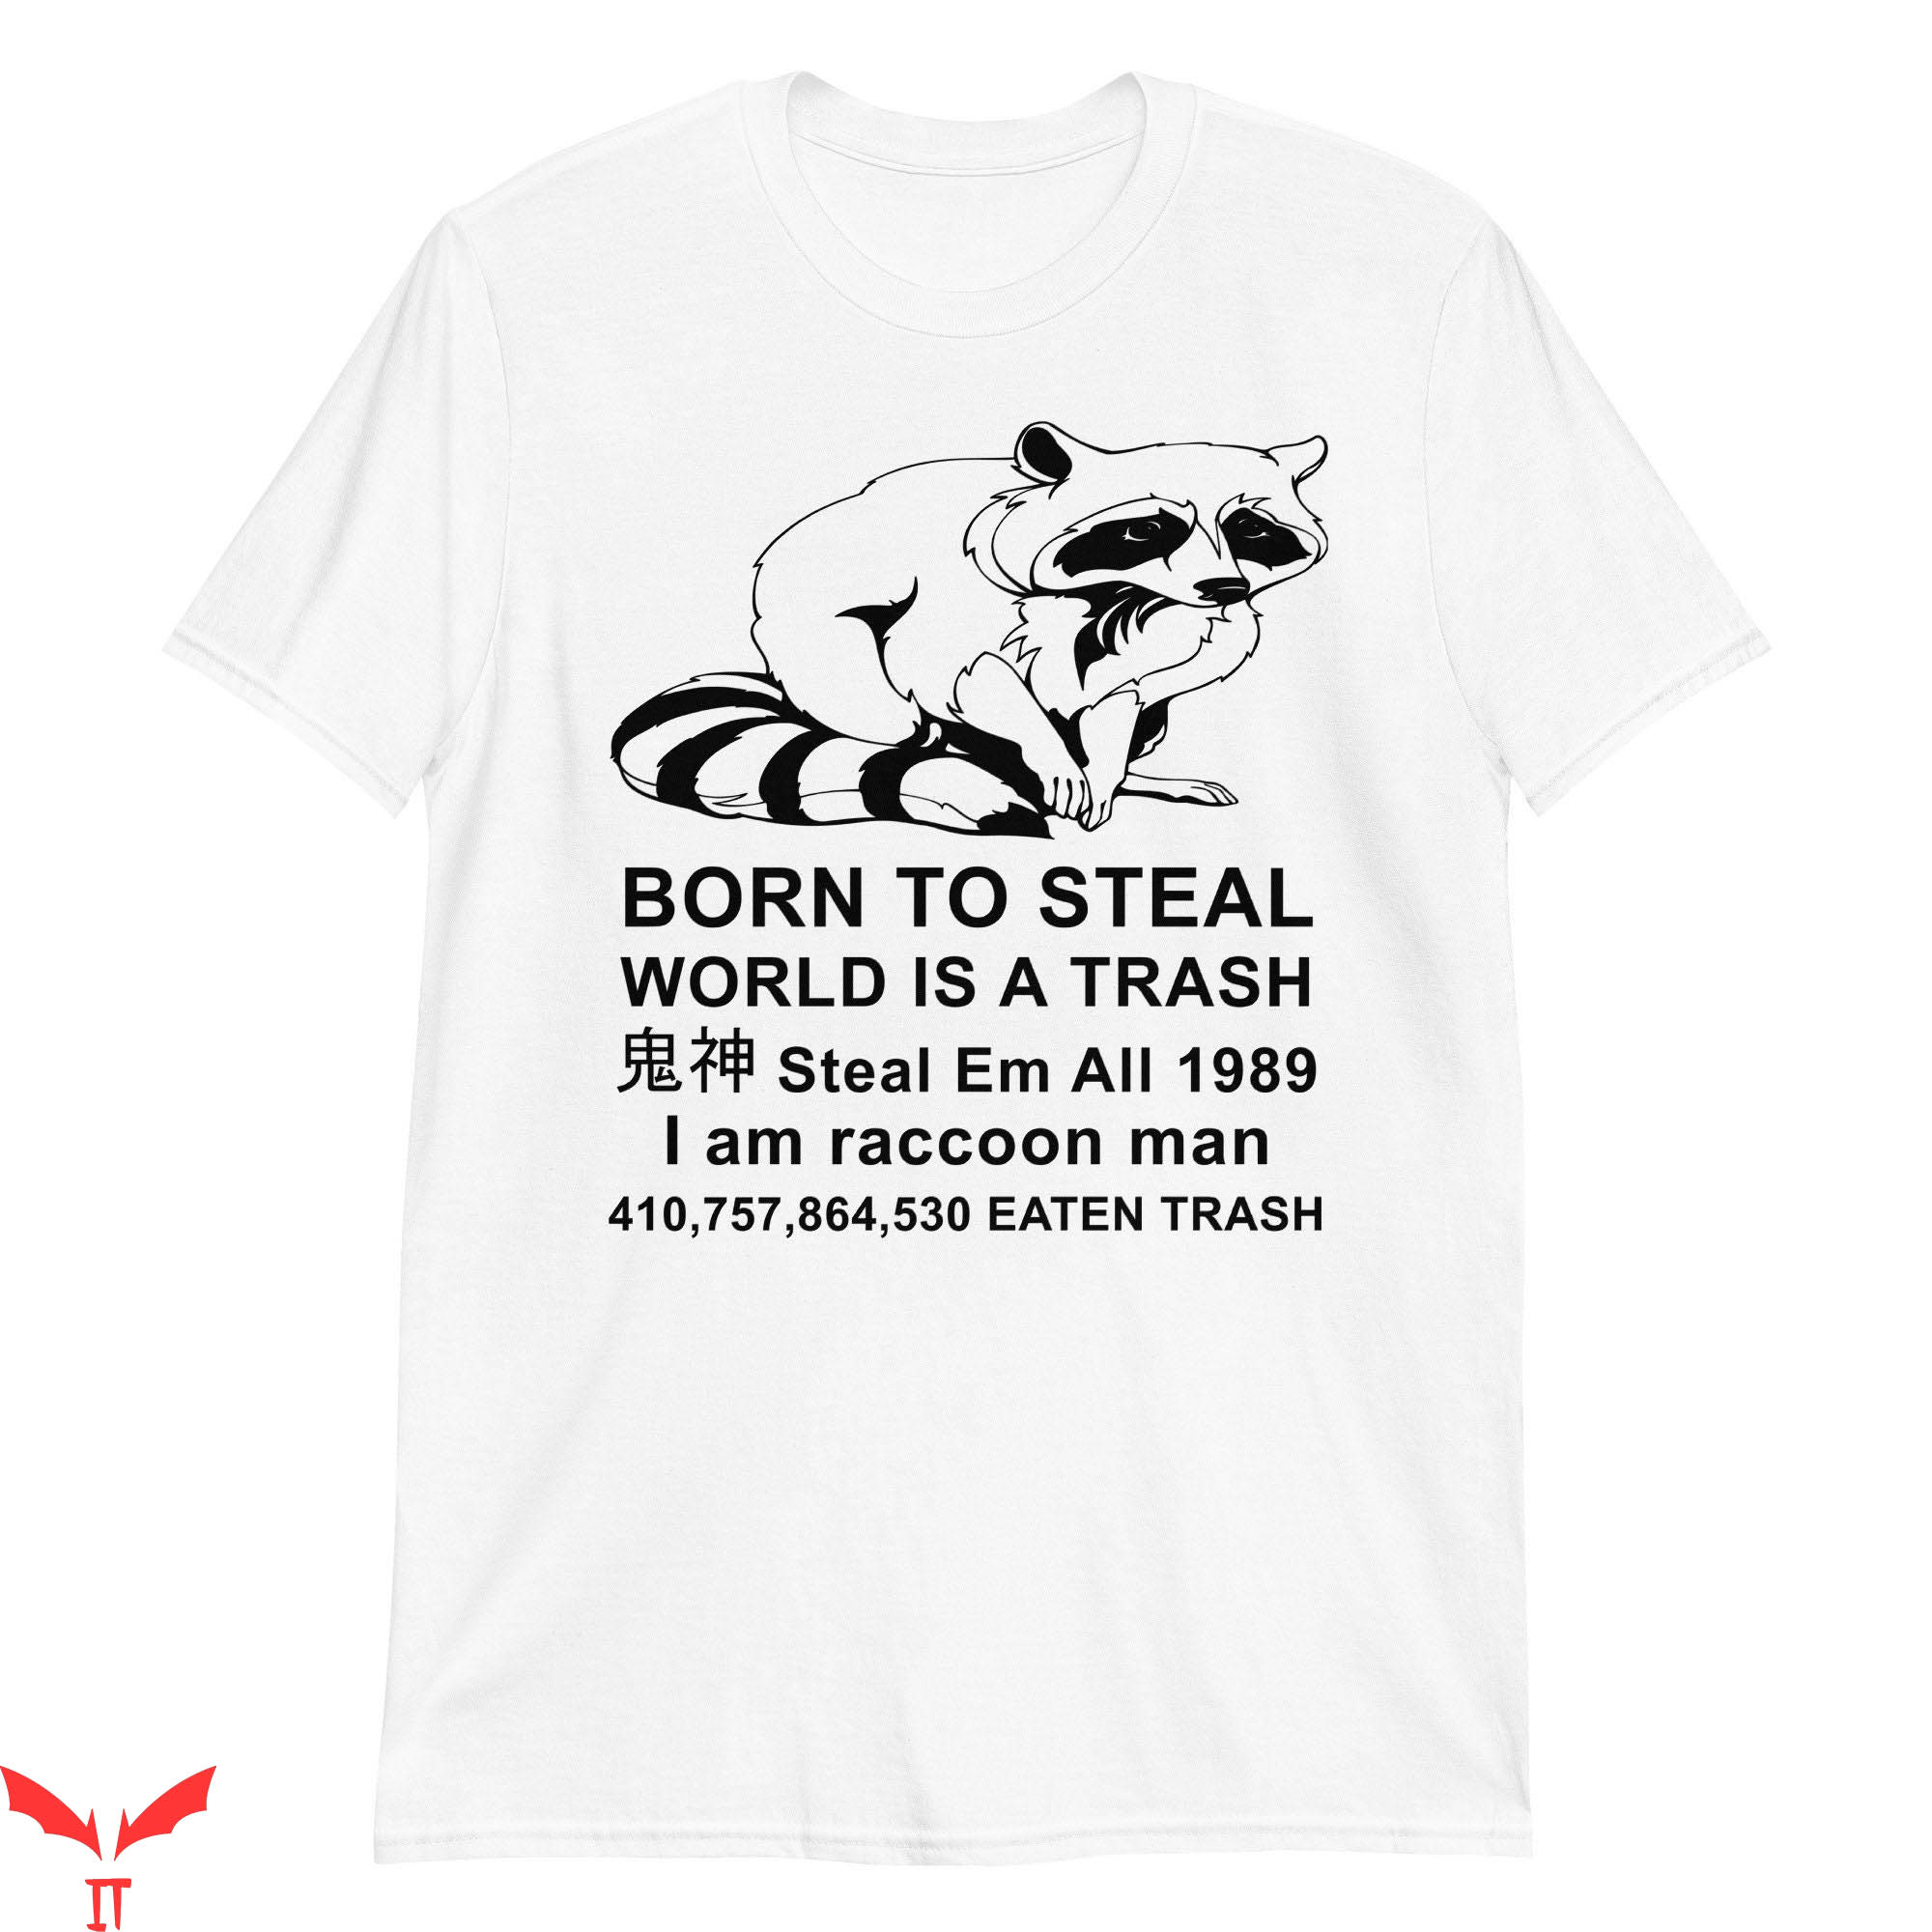 Born To Die World Is A T-Shirt Born To Steal World Is Trash